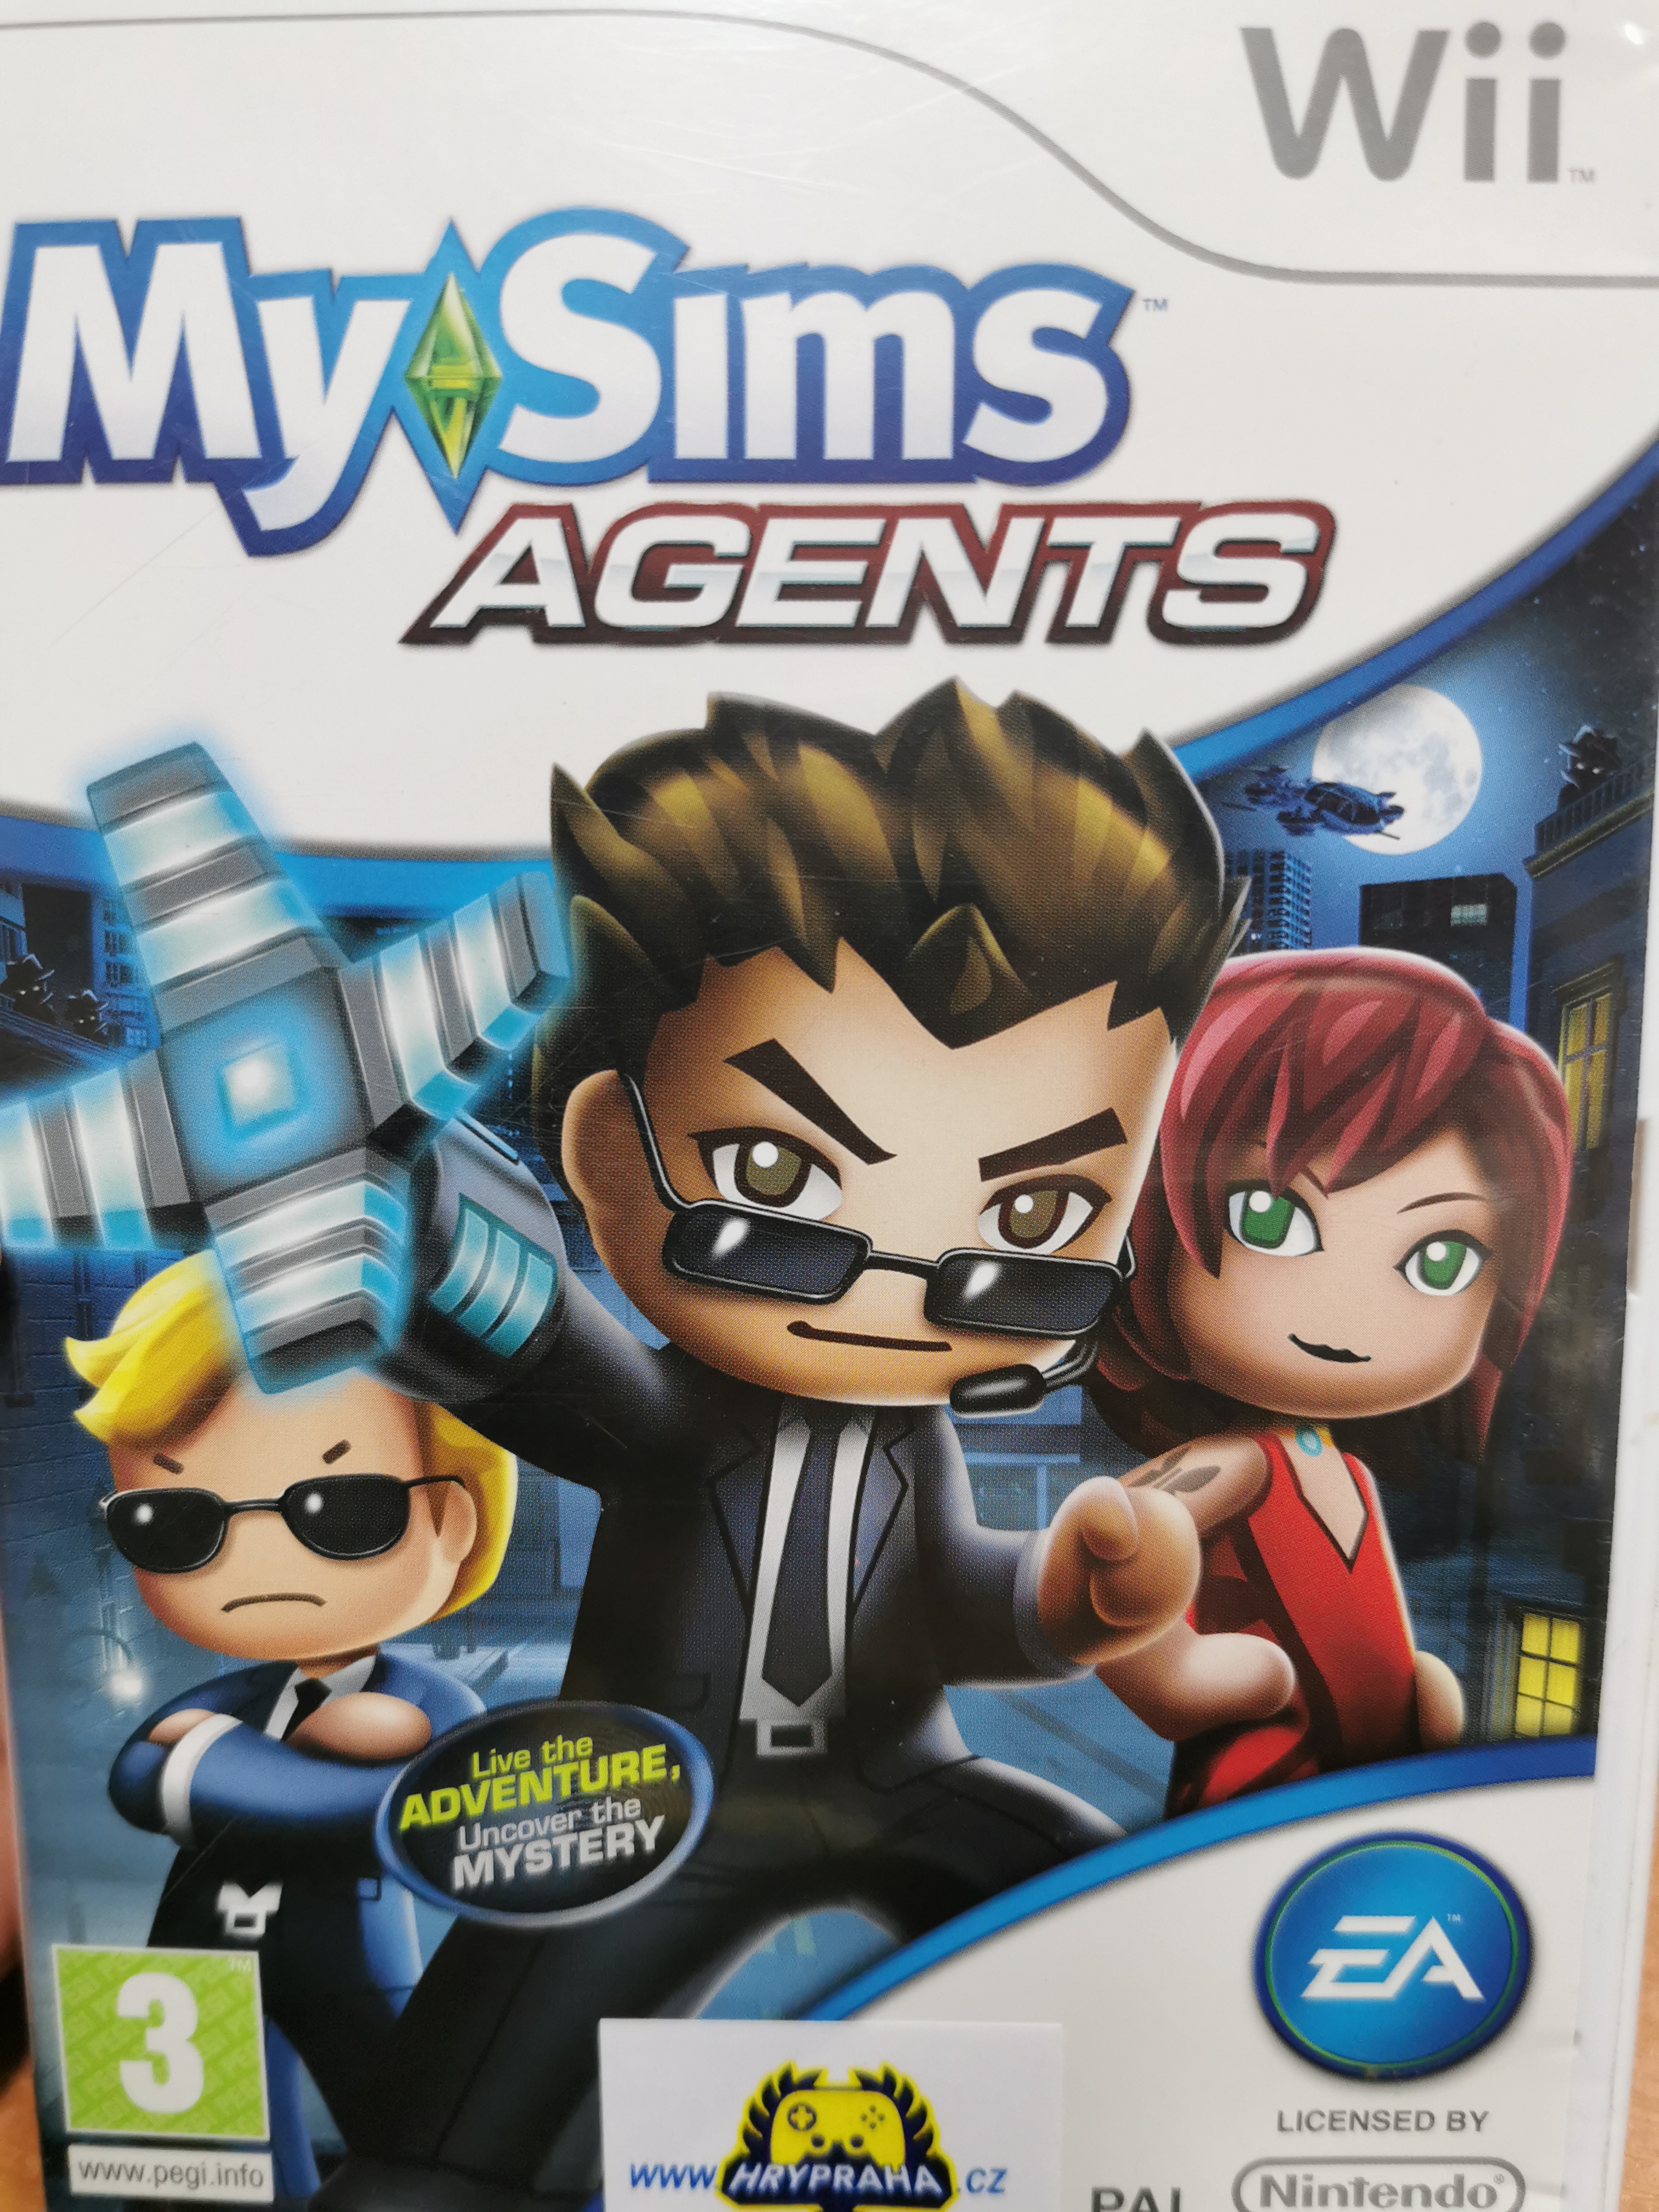 My sims agents - Nintendo wii 